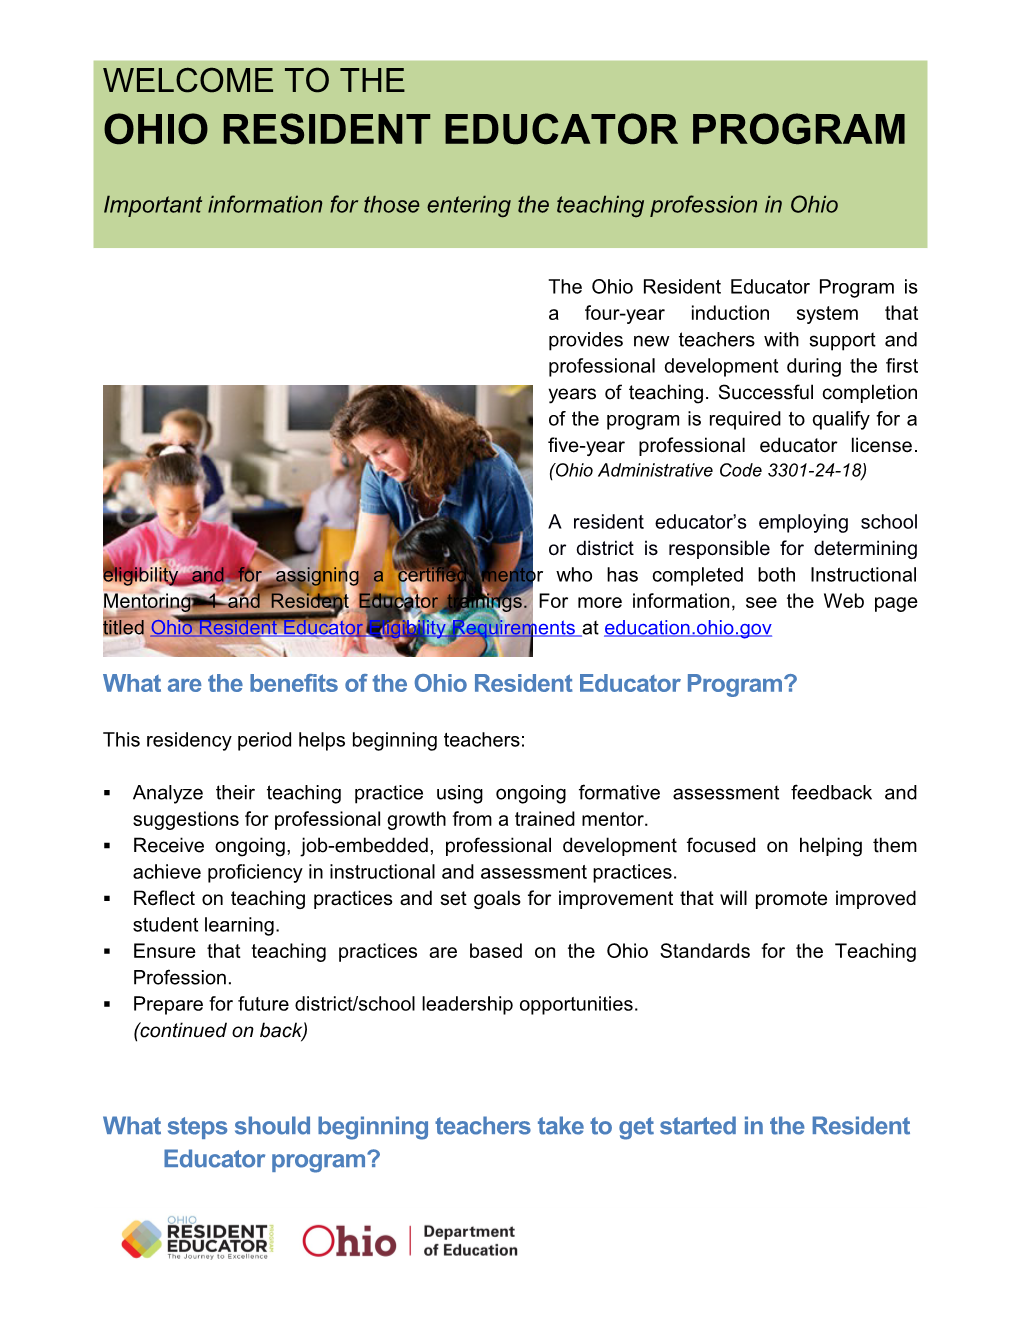 What Are the Benefits of the Ohio Resident Educator Program?